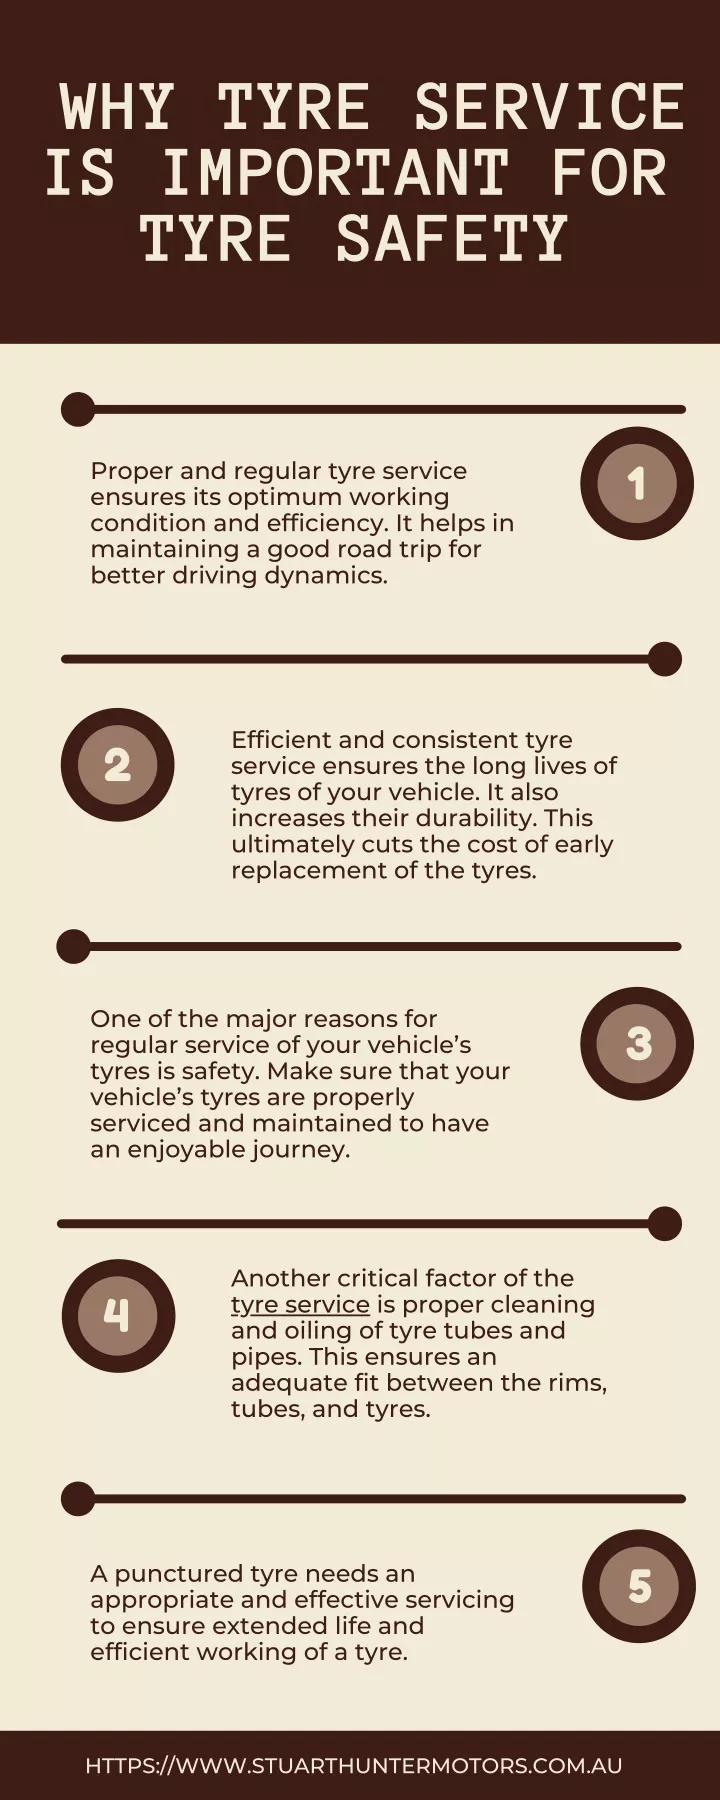 why tyre service is important for tyre safety